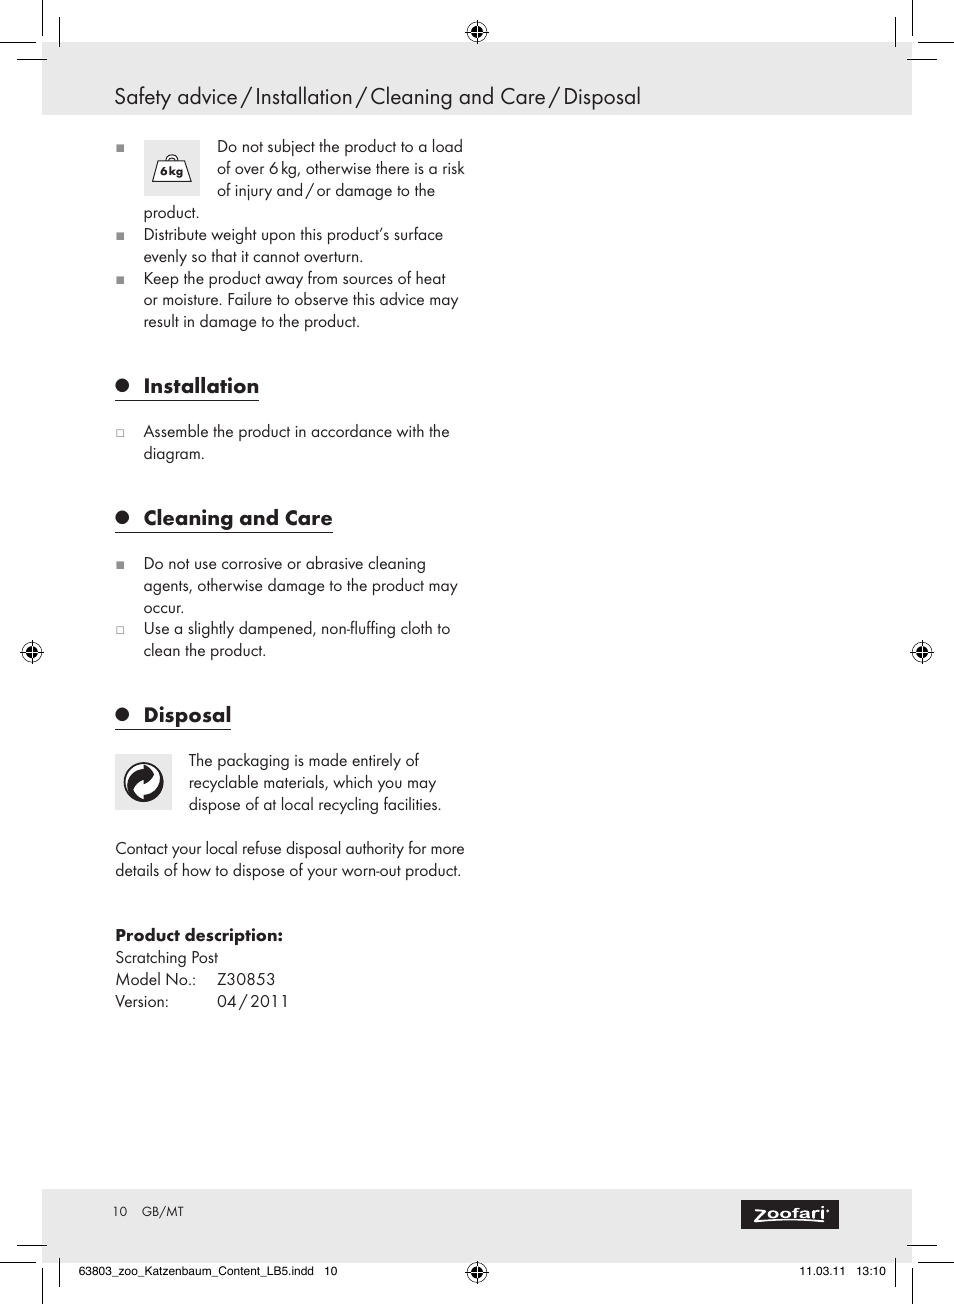 Installation, Cleaning and care, Disposal | Zoofari Scratching Post Z30853 User Manual | Page 8 / 11